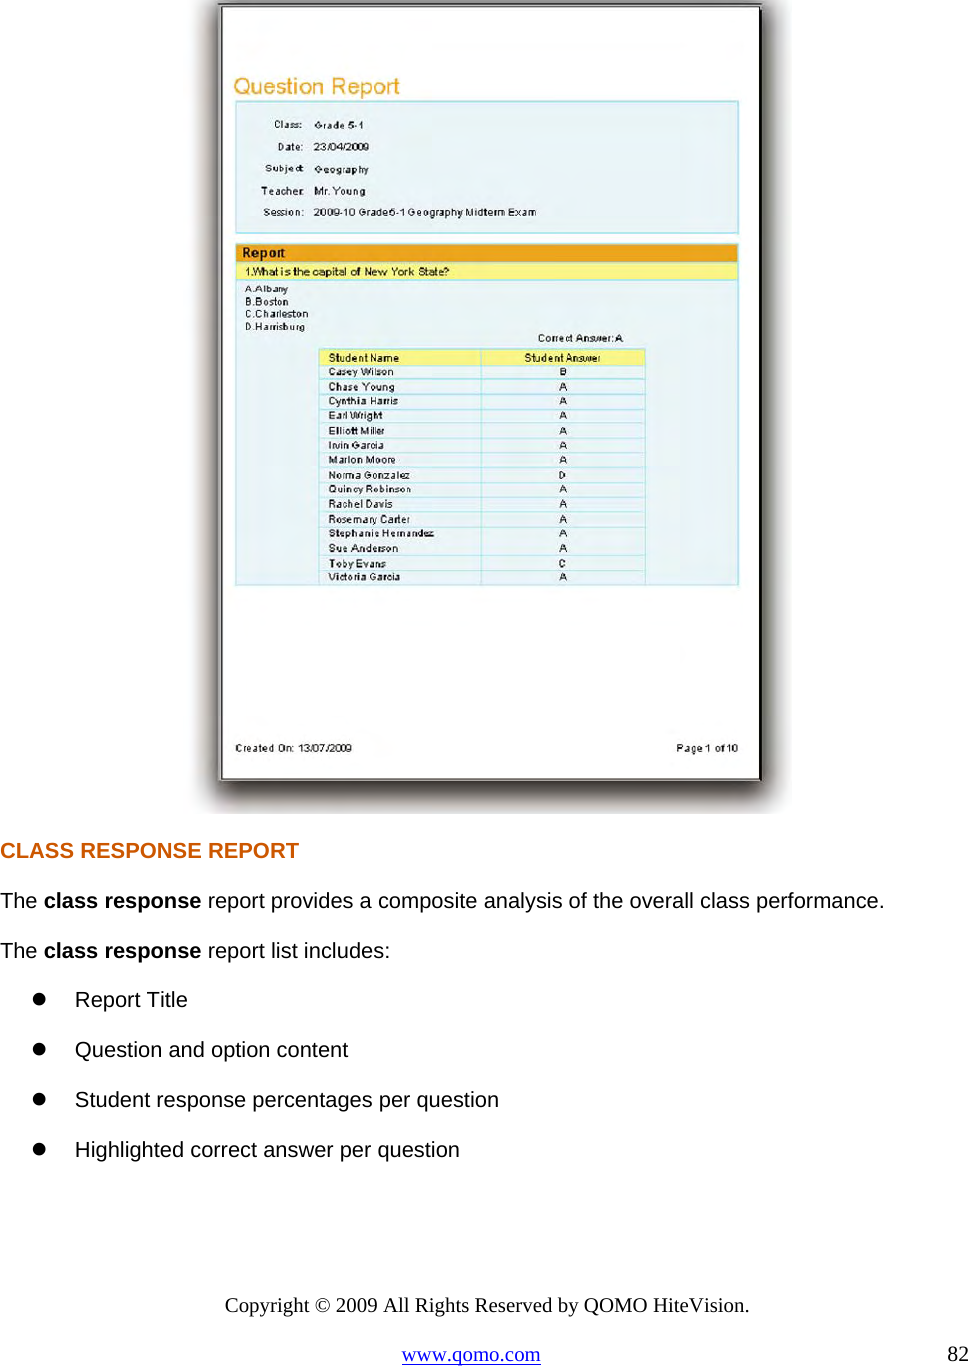 Copyright © 2009 All Rights Reserved by QOMO HiteVision. www.qomo.com                                                                          82   CLASS RESPONSE REPORT The class response report provides a composite analysis of the overall class performance.  The class response report list includes:   Report Title   Question and option content   Student response percentages per question   Highlighted correct answer per question 